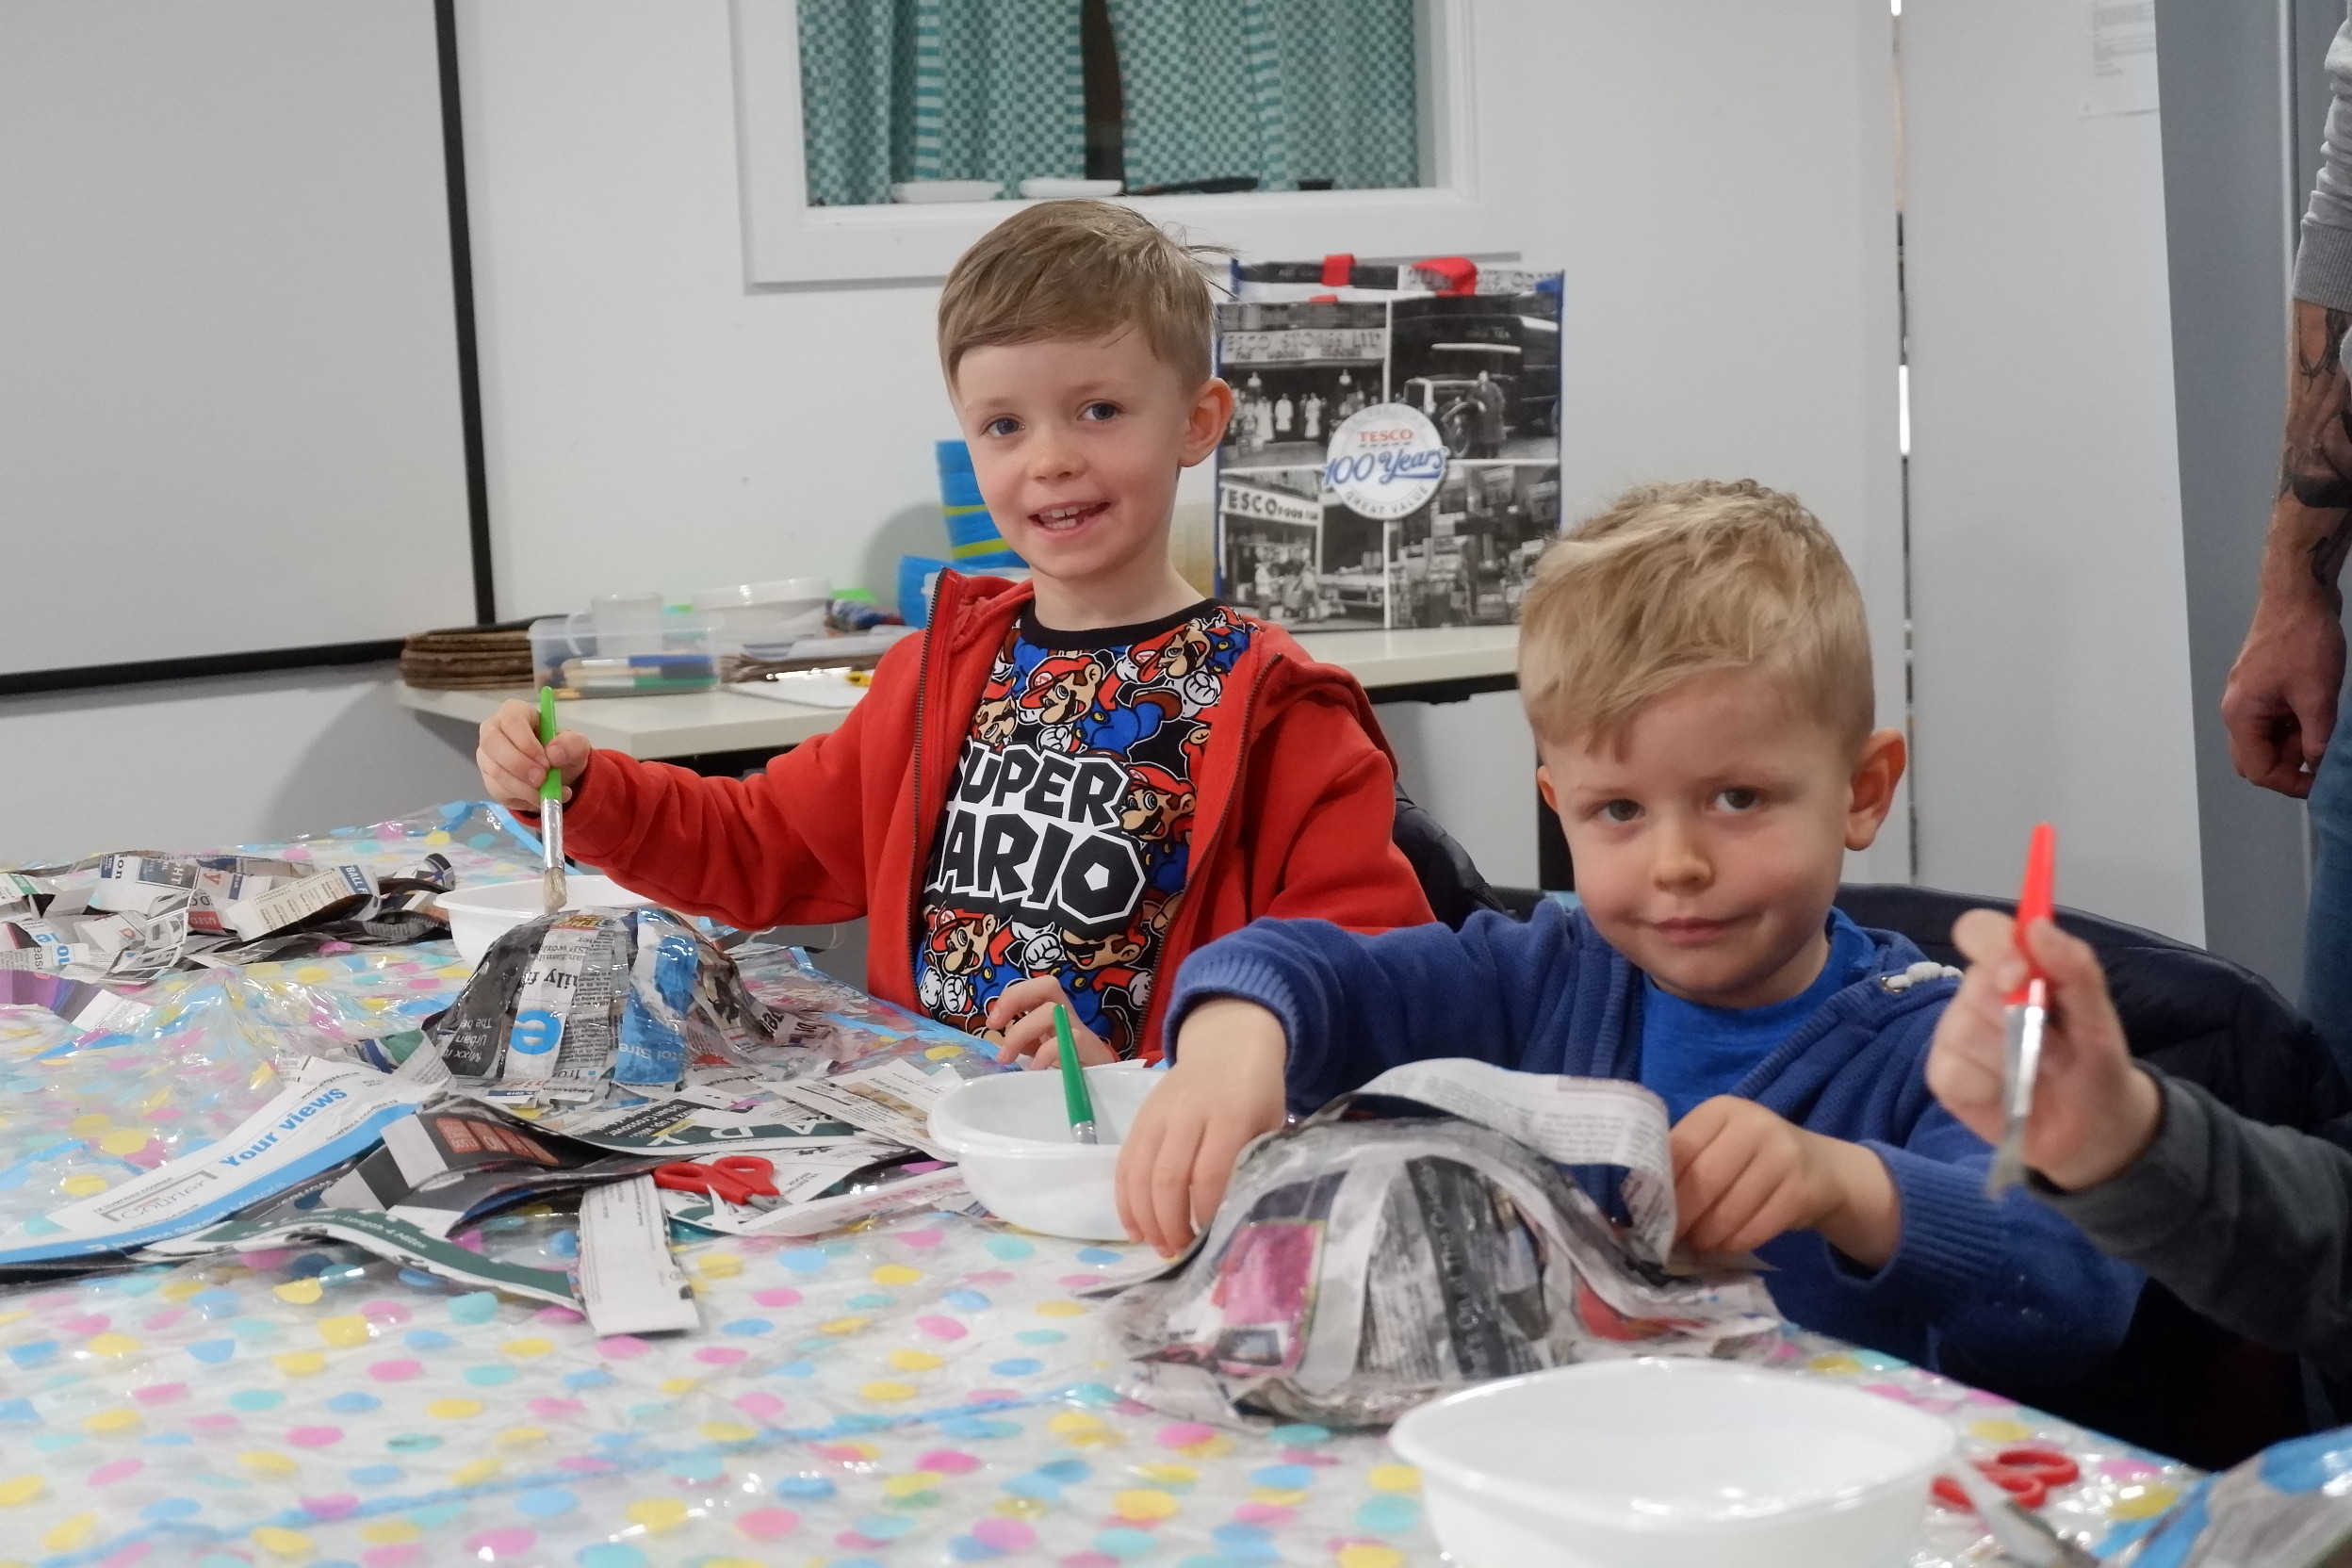 Two young boys smile at the camera as they make paper maché helmets sat at a table.